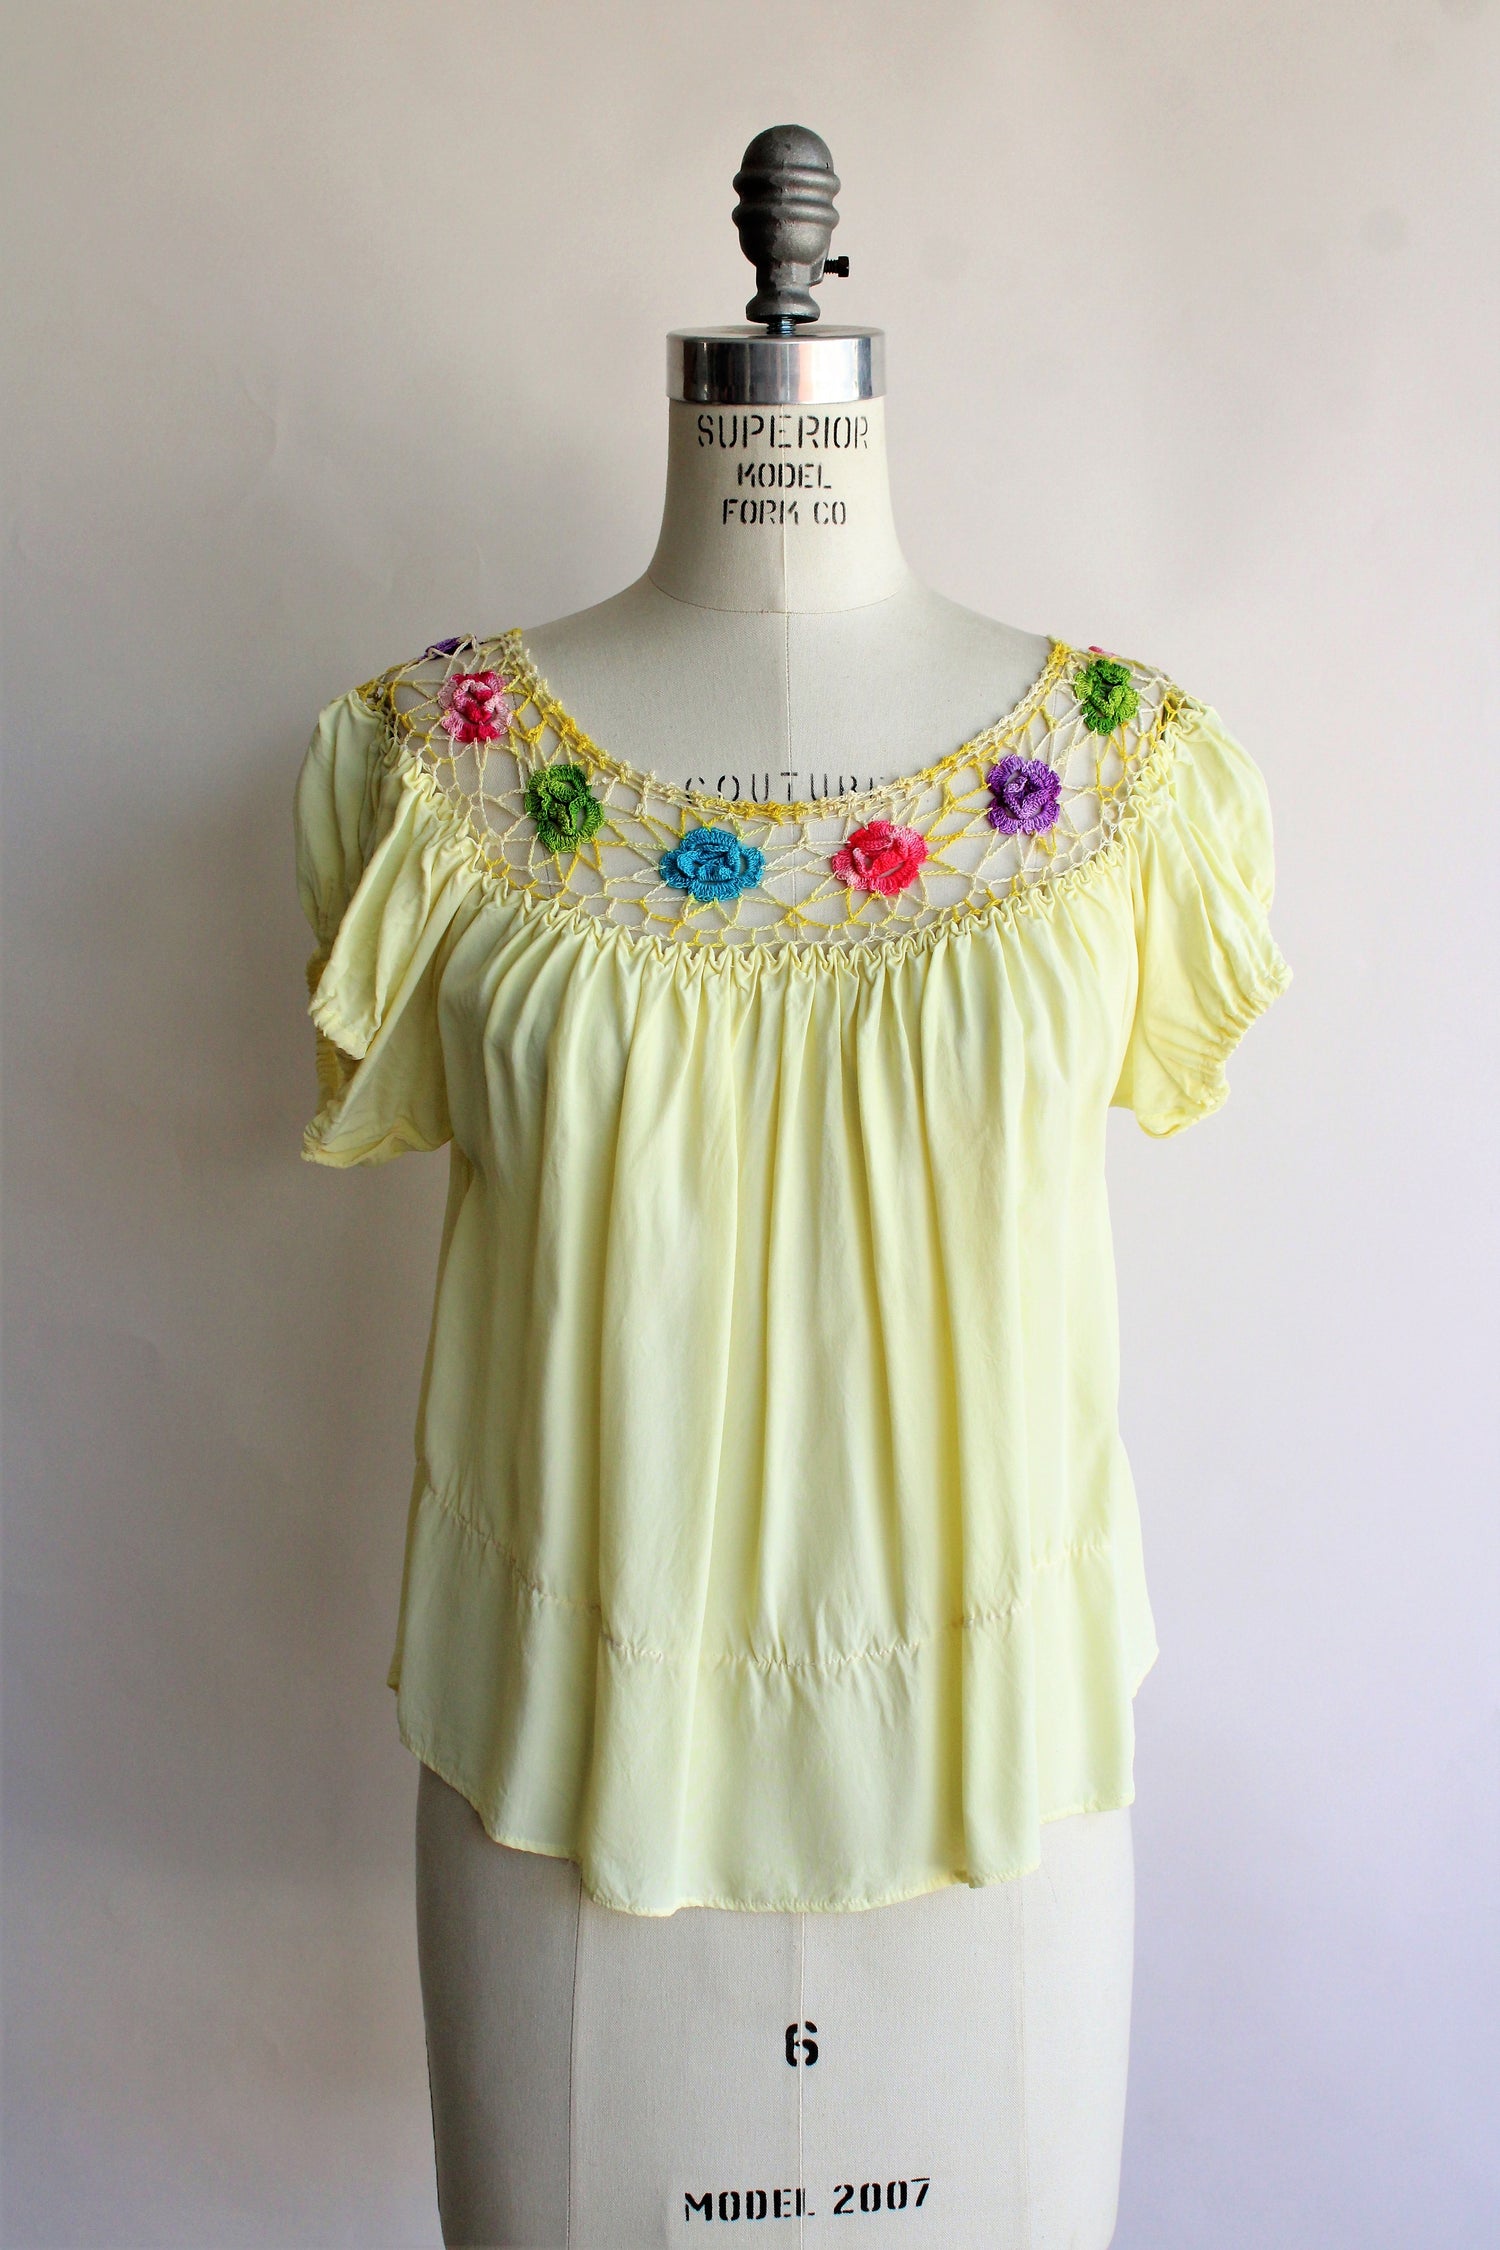 Vintage 1940s 1950s Yellow Peasant Blouse with Floral Trim